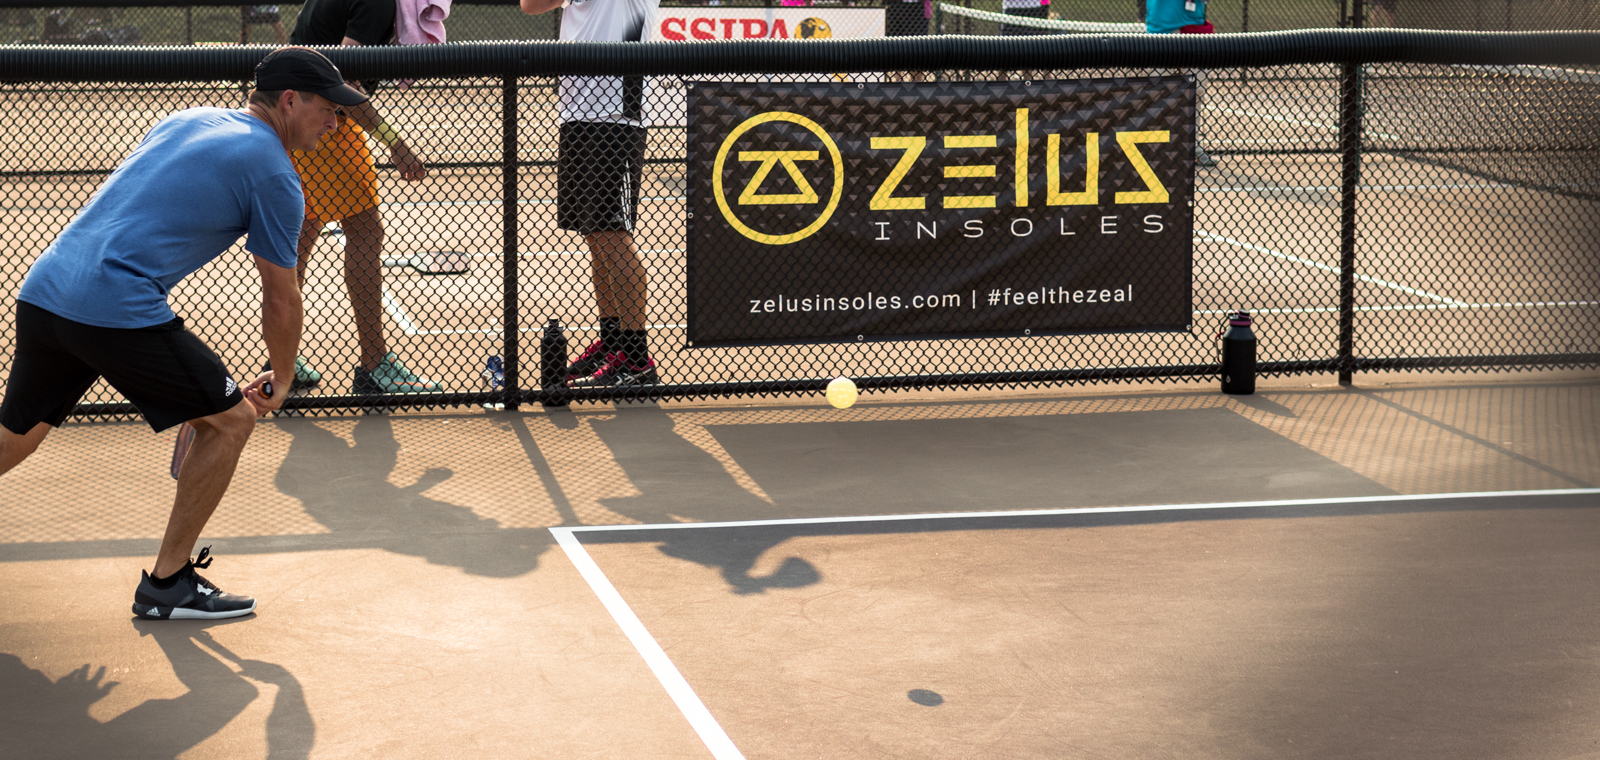 Zelus Insoles Becomes Official Insoles Partner of the USA Pickleball Association